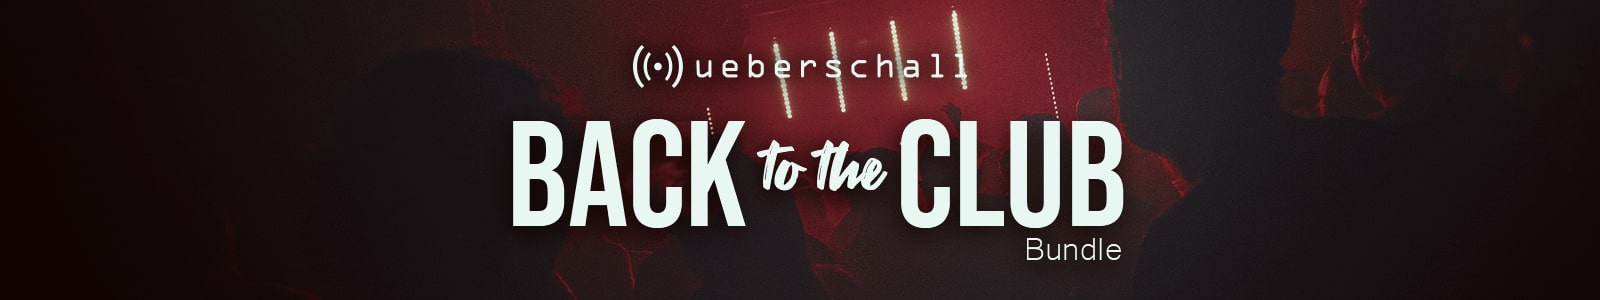 Back to the Club Bundle by Ueberschall